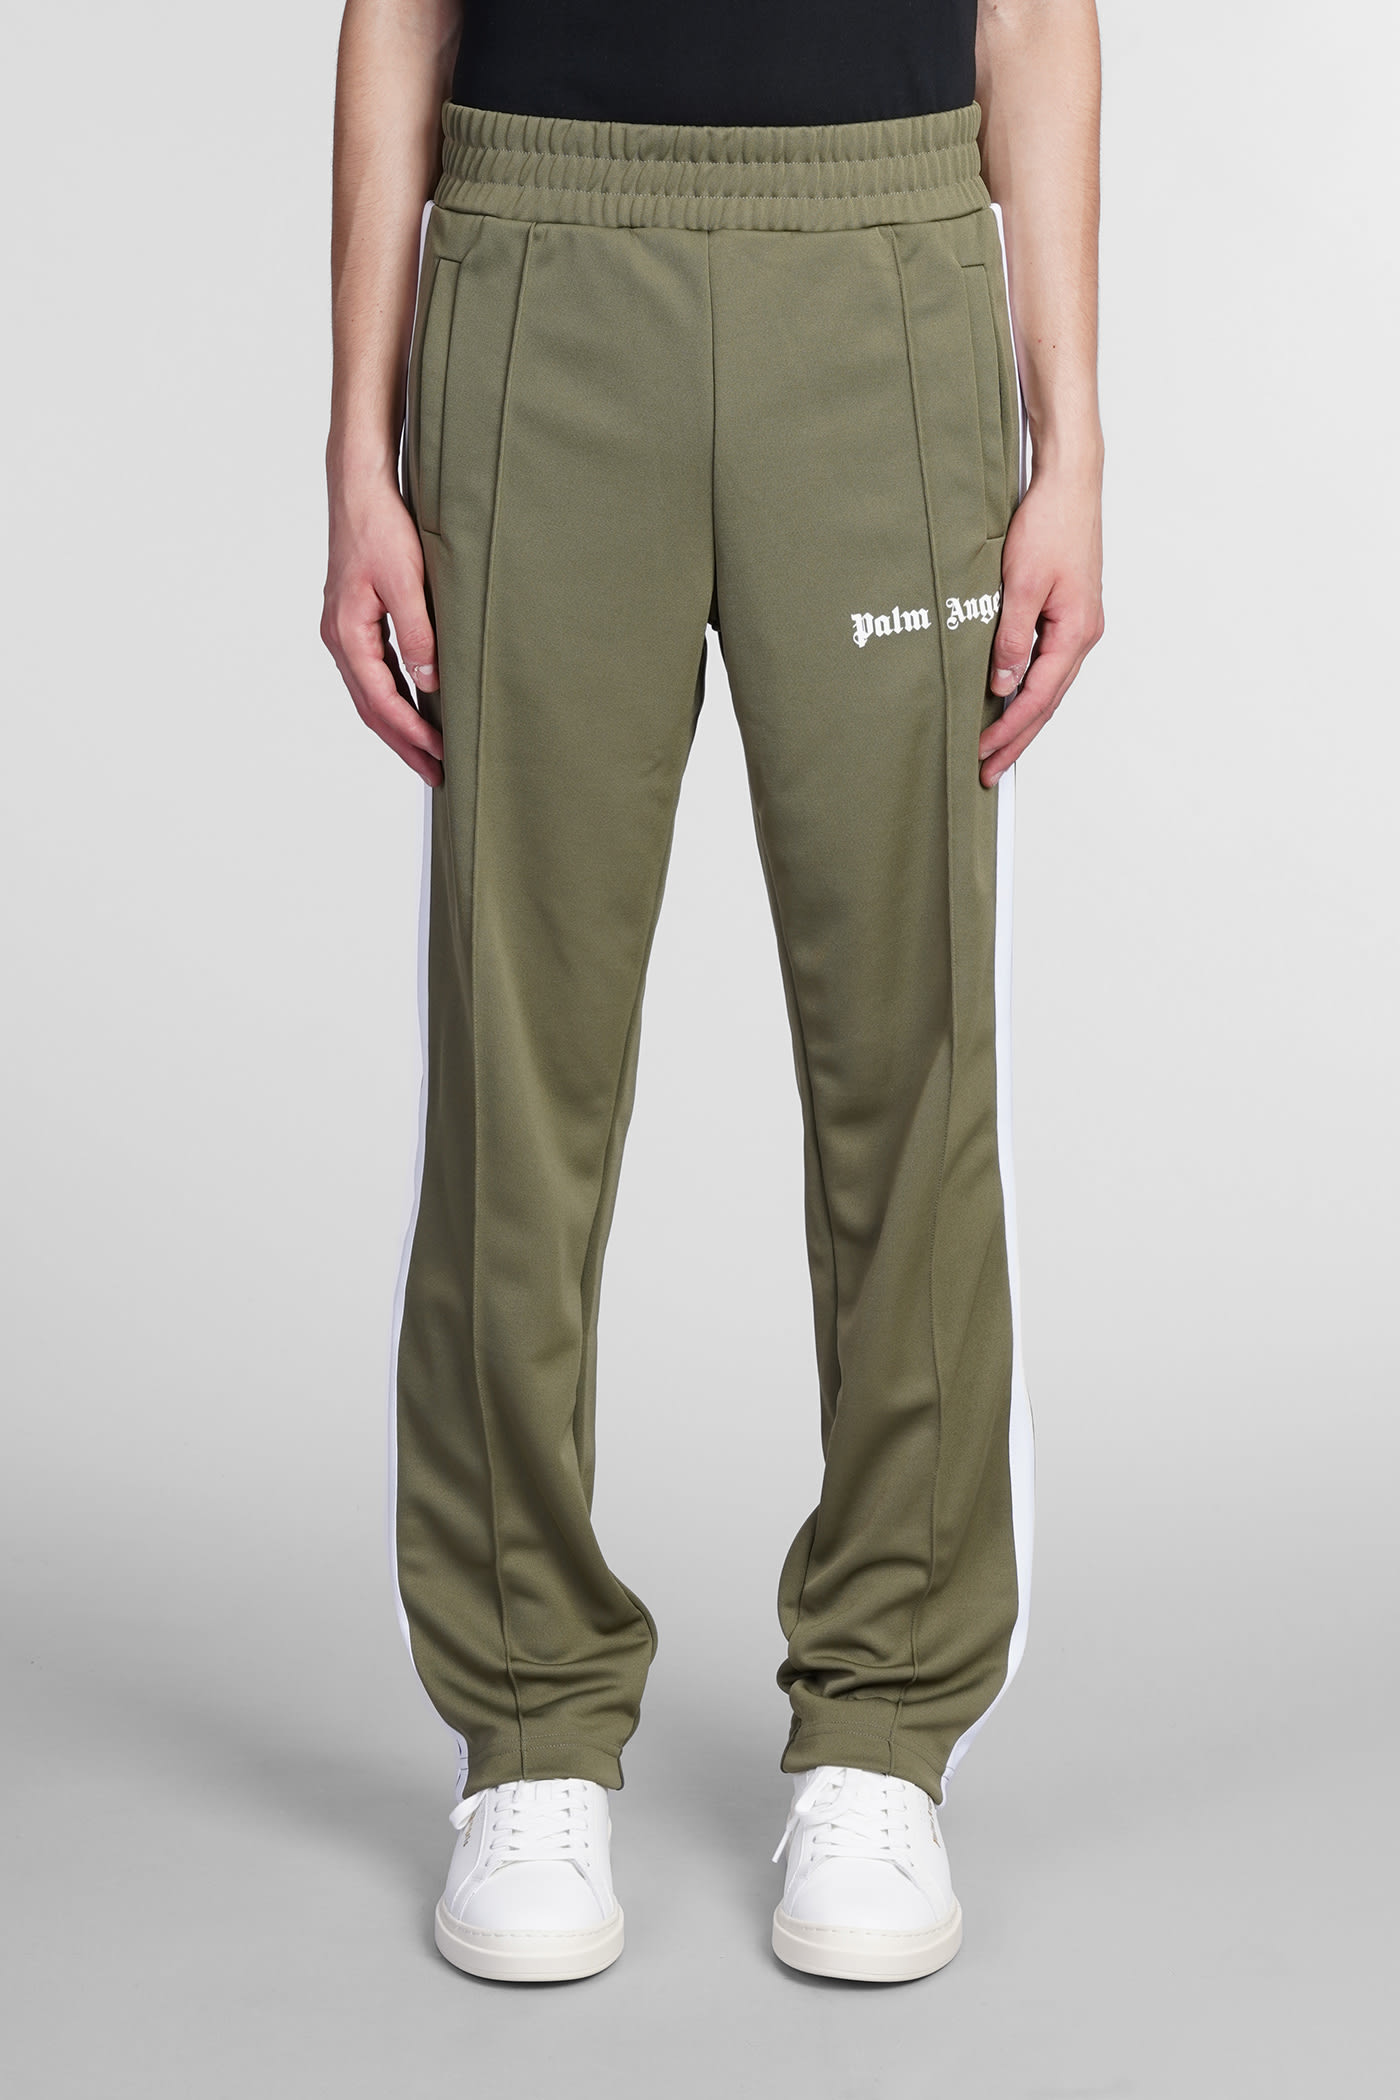 Palm Angels Pants In Green Polyester